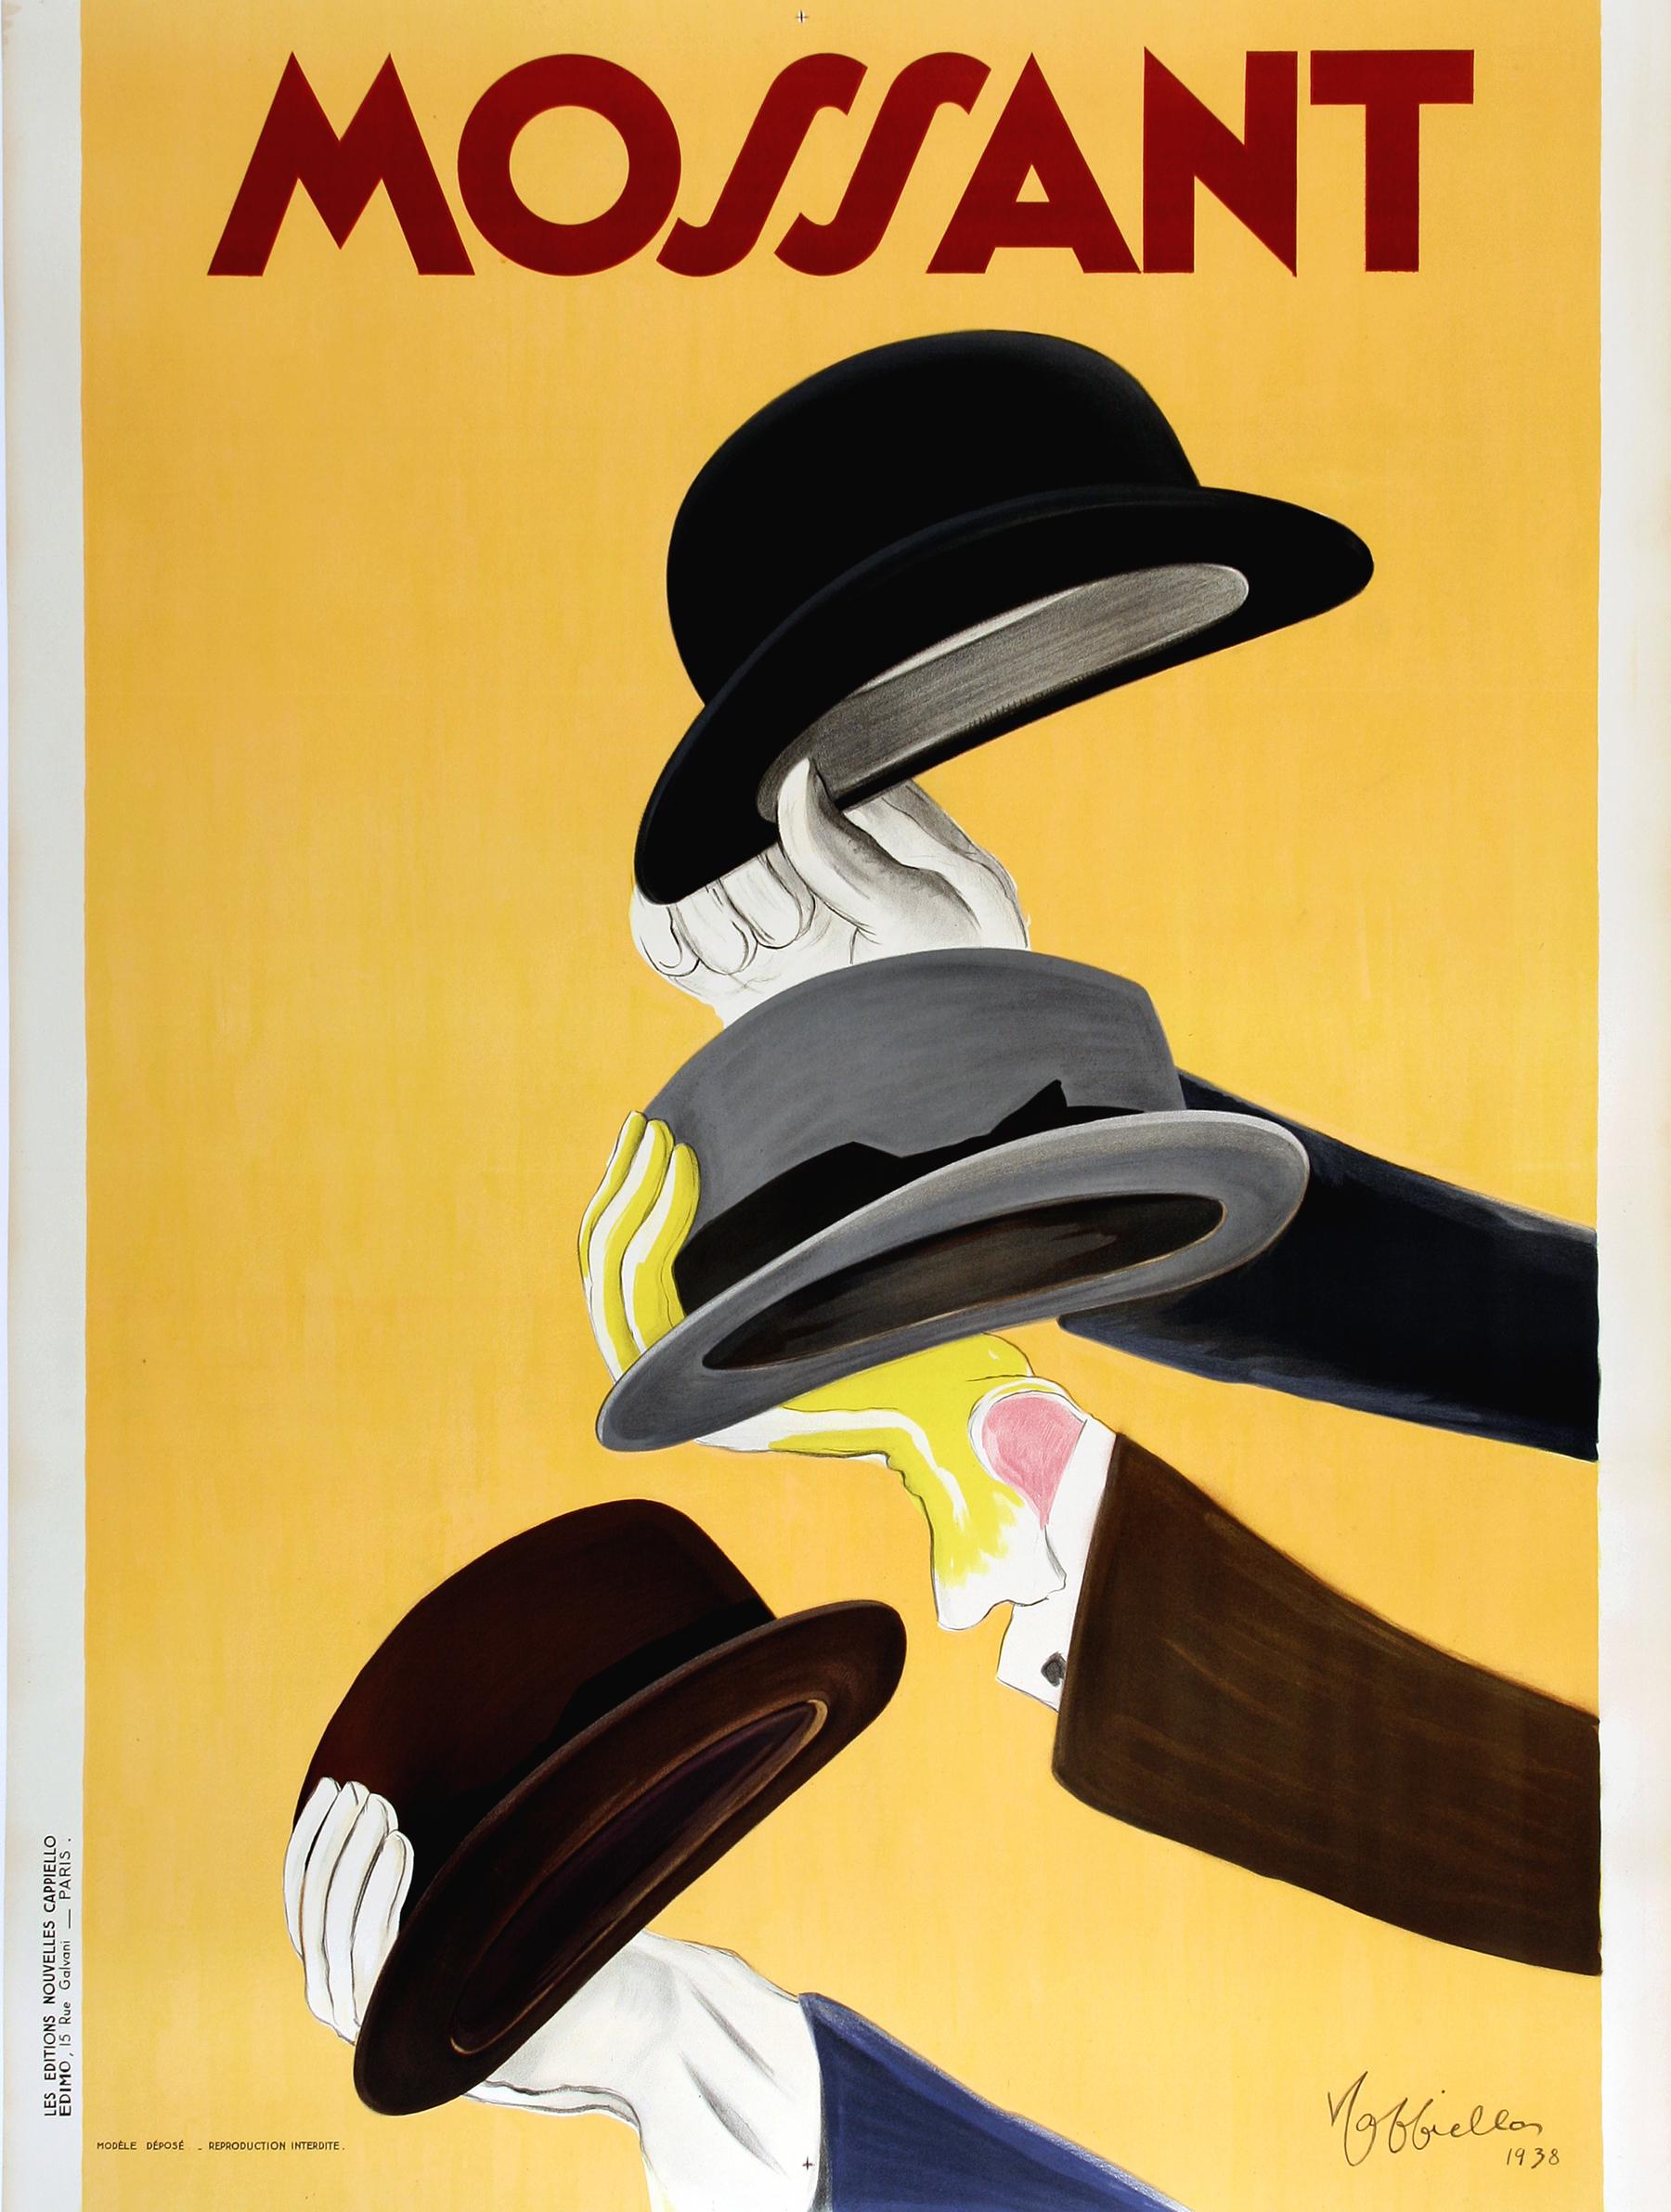 This is an original stone lithograph poster created by the famous poster artist, Leonetto Cappiello. It was done toward the end of his prolific career. In this image Cappiello used his fine artistic skills to portray the grace and elegance of the